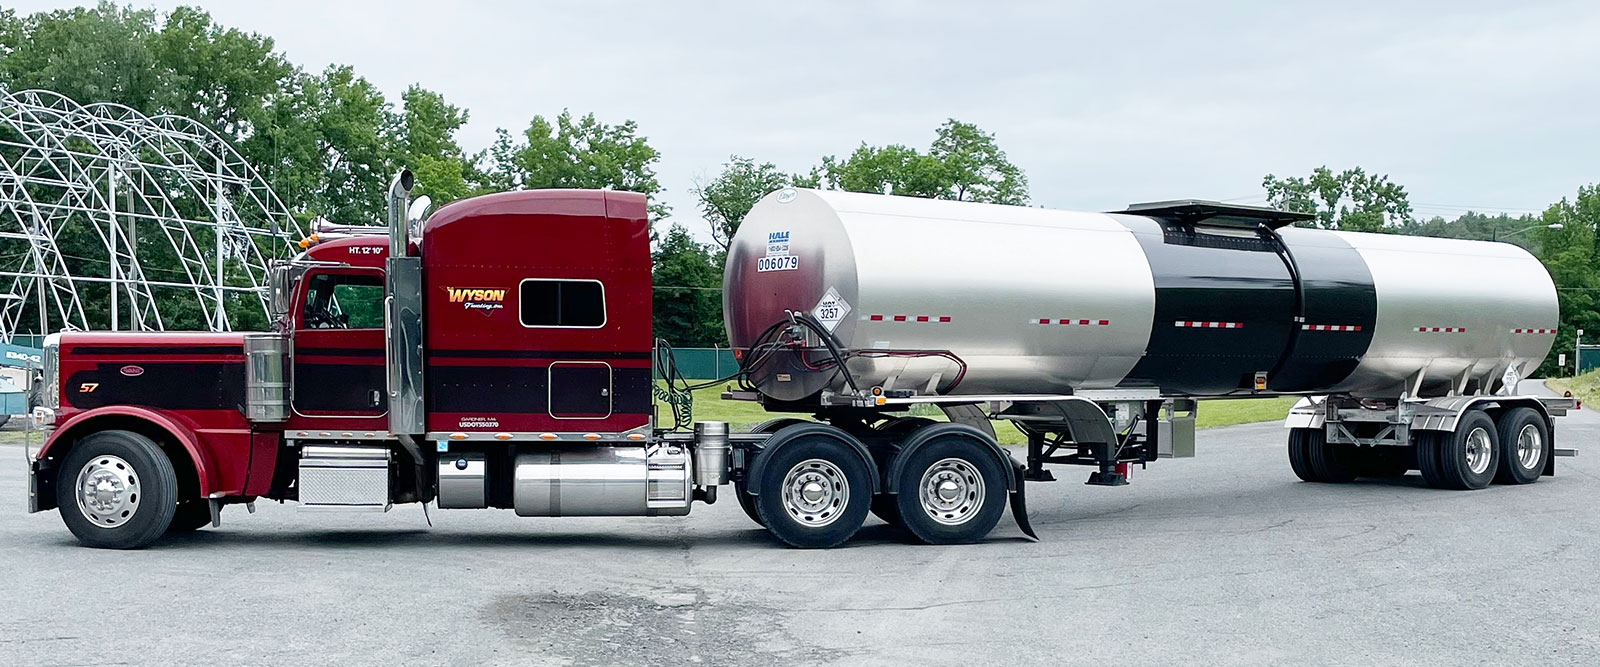 Wyson Trucking Truck and Trailer